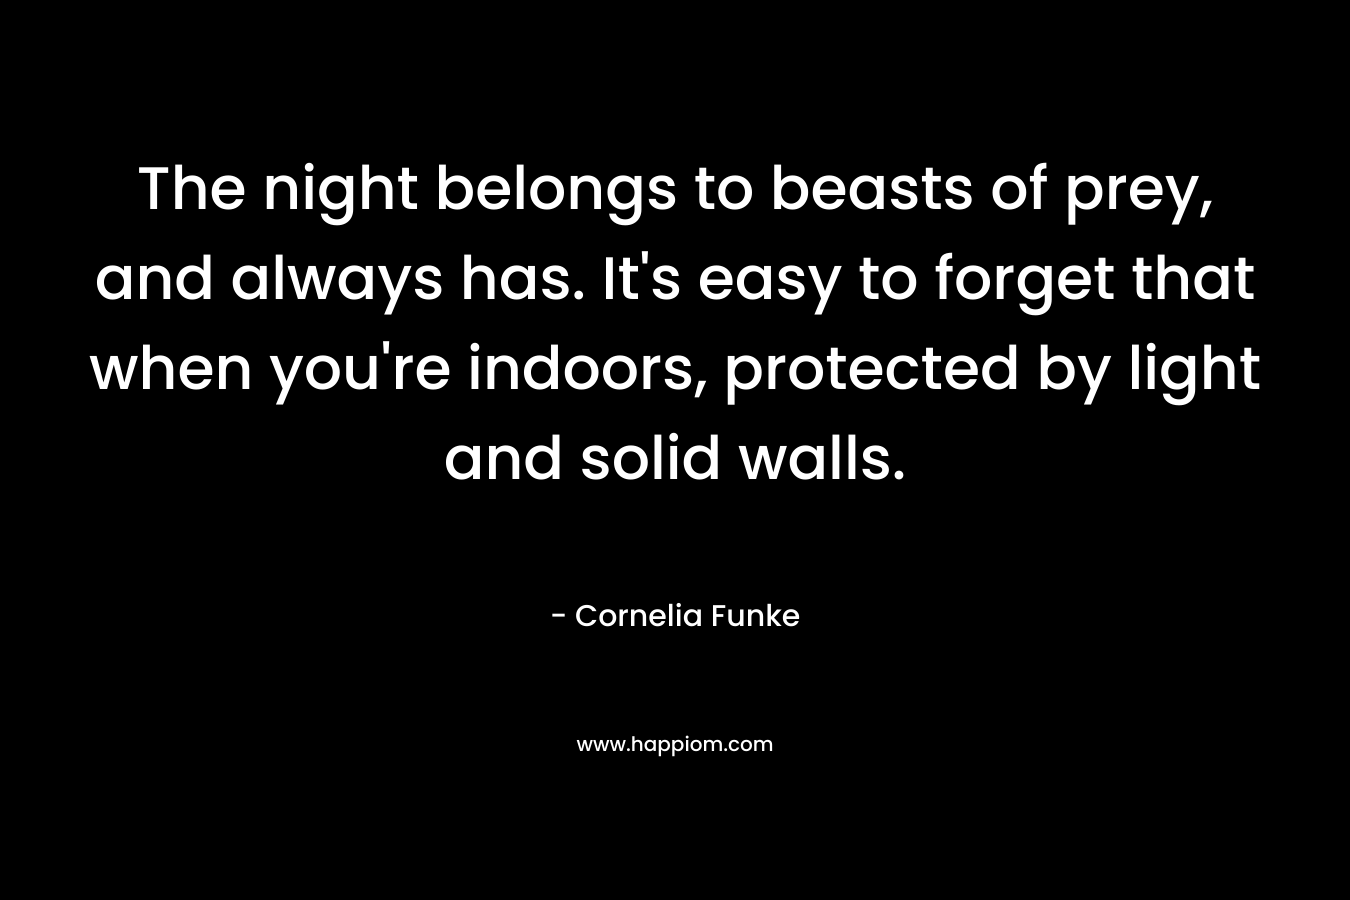 The night belongs to beasts of prey, and always has. It's easy to forget that when you're indoors, protected by light and solid walls.